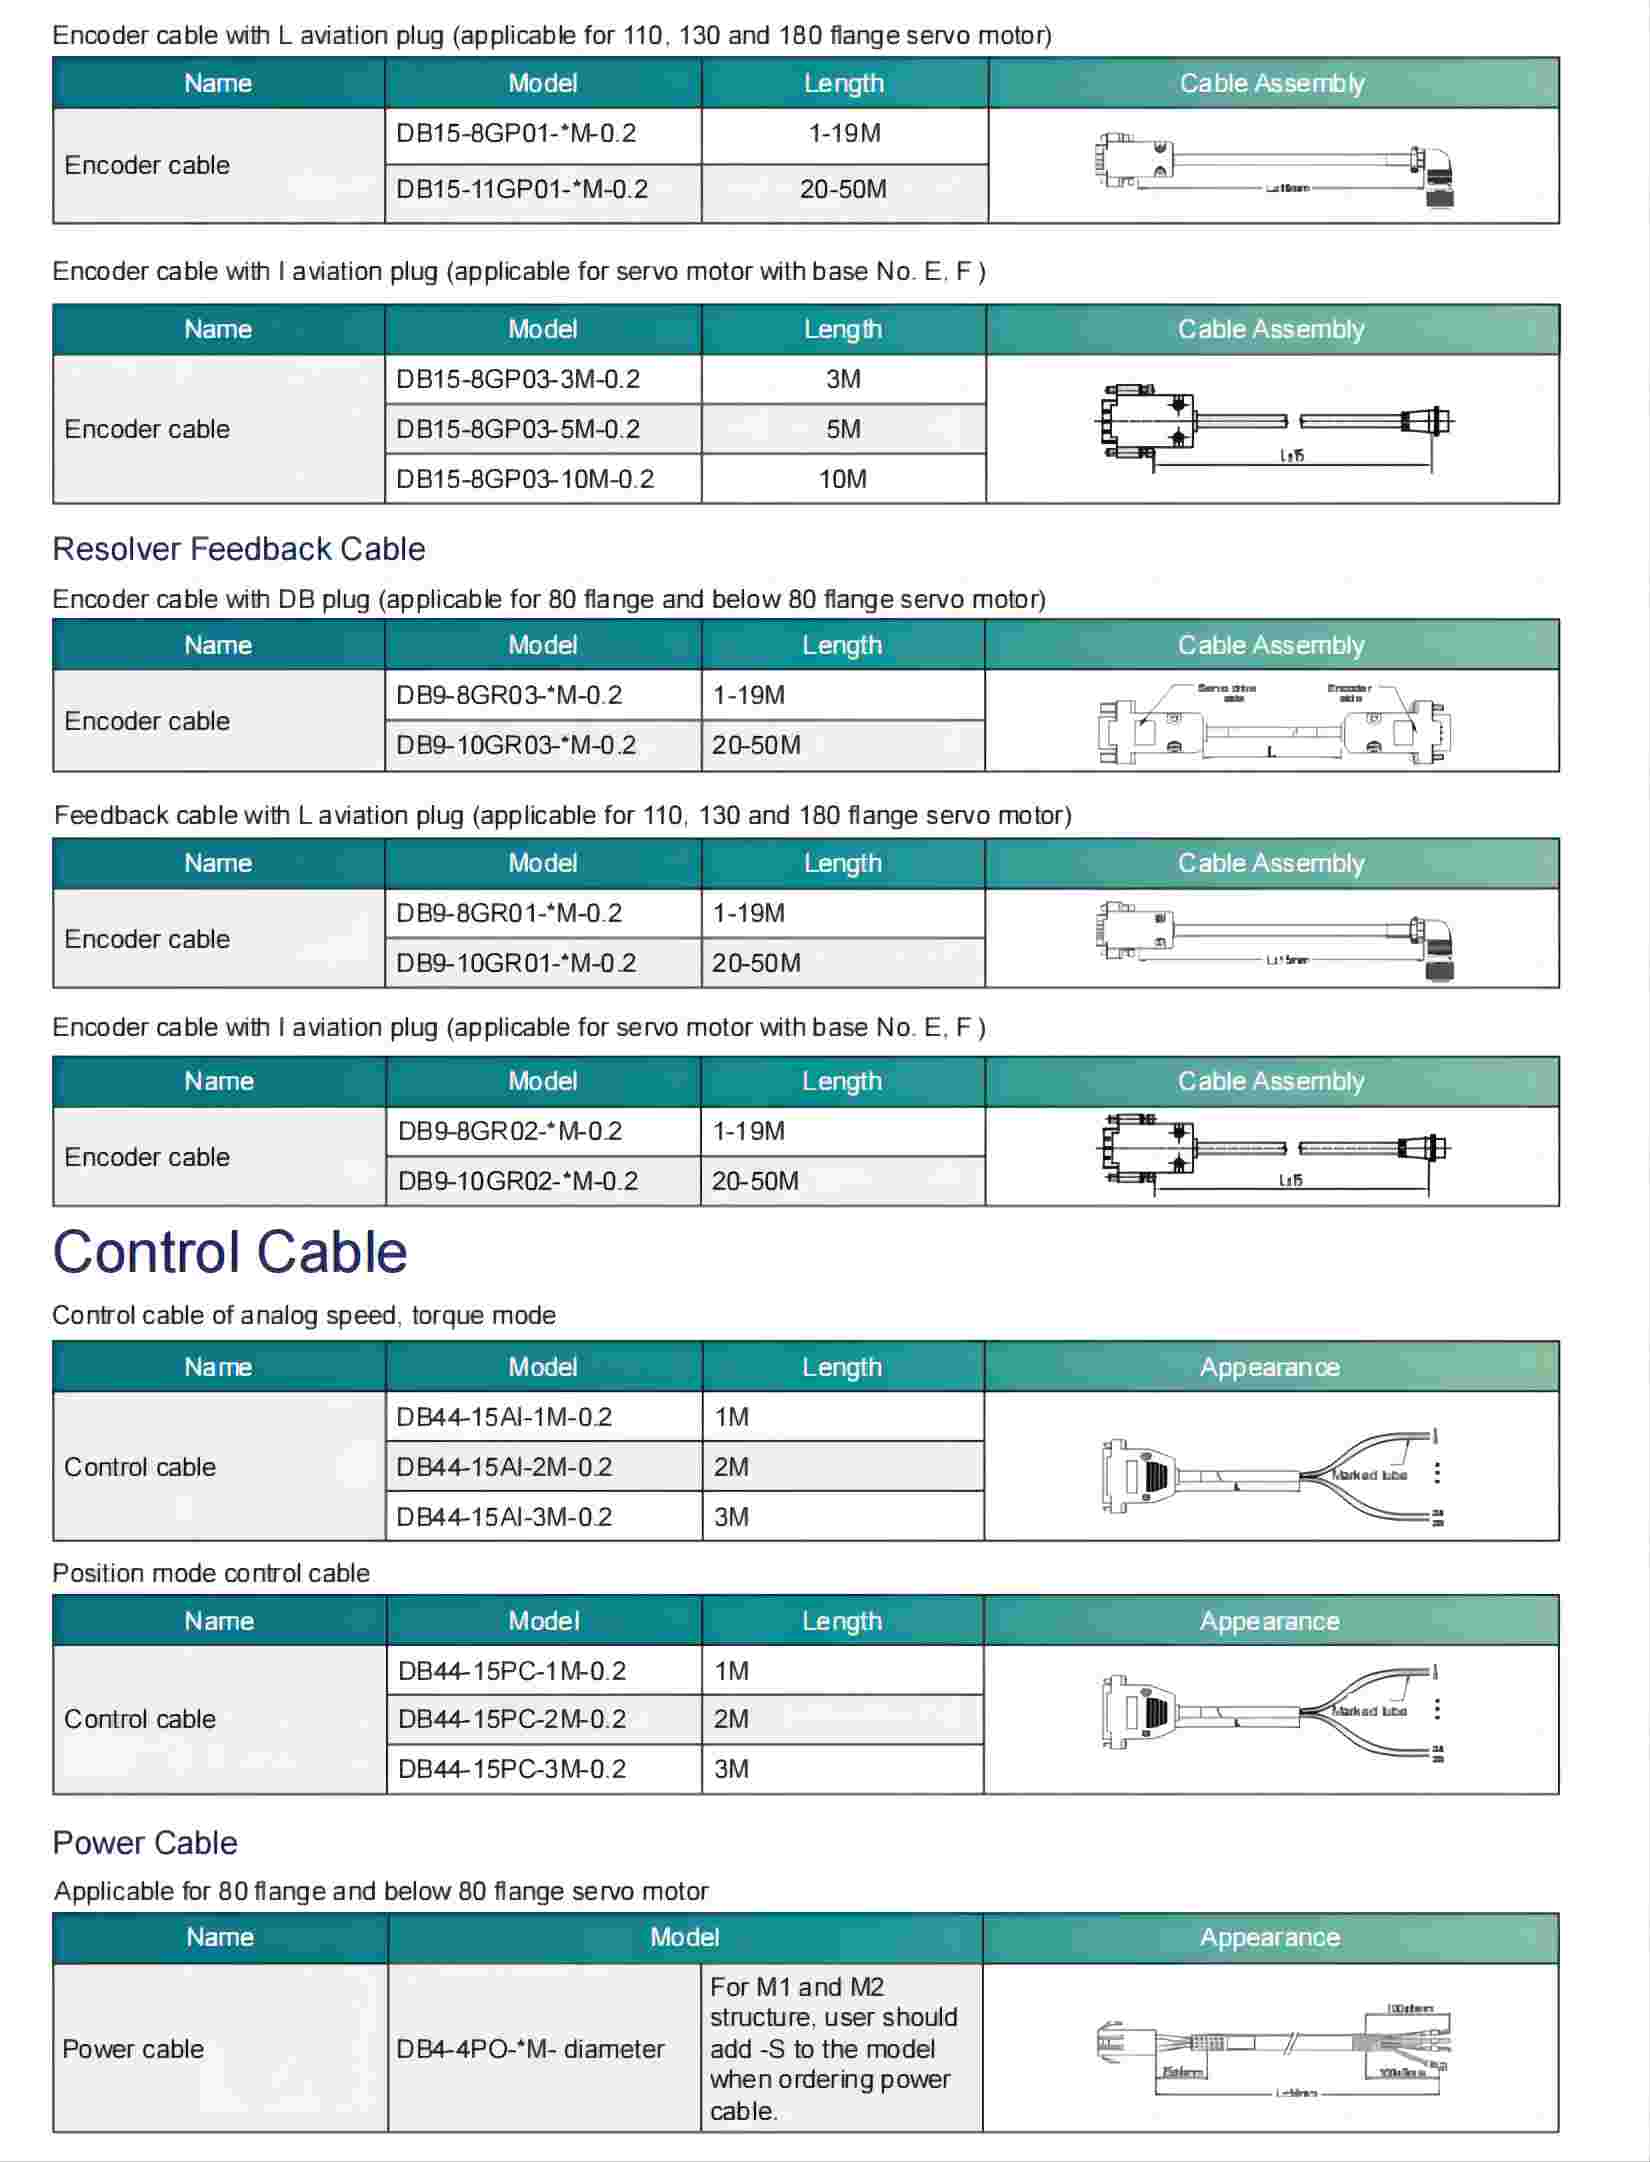 Accessories of SD20-G Incremental Encoder Cable